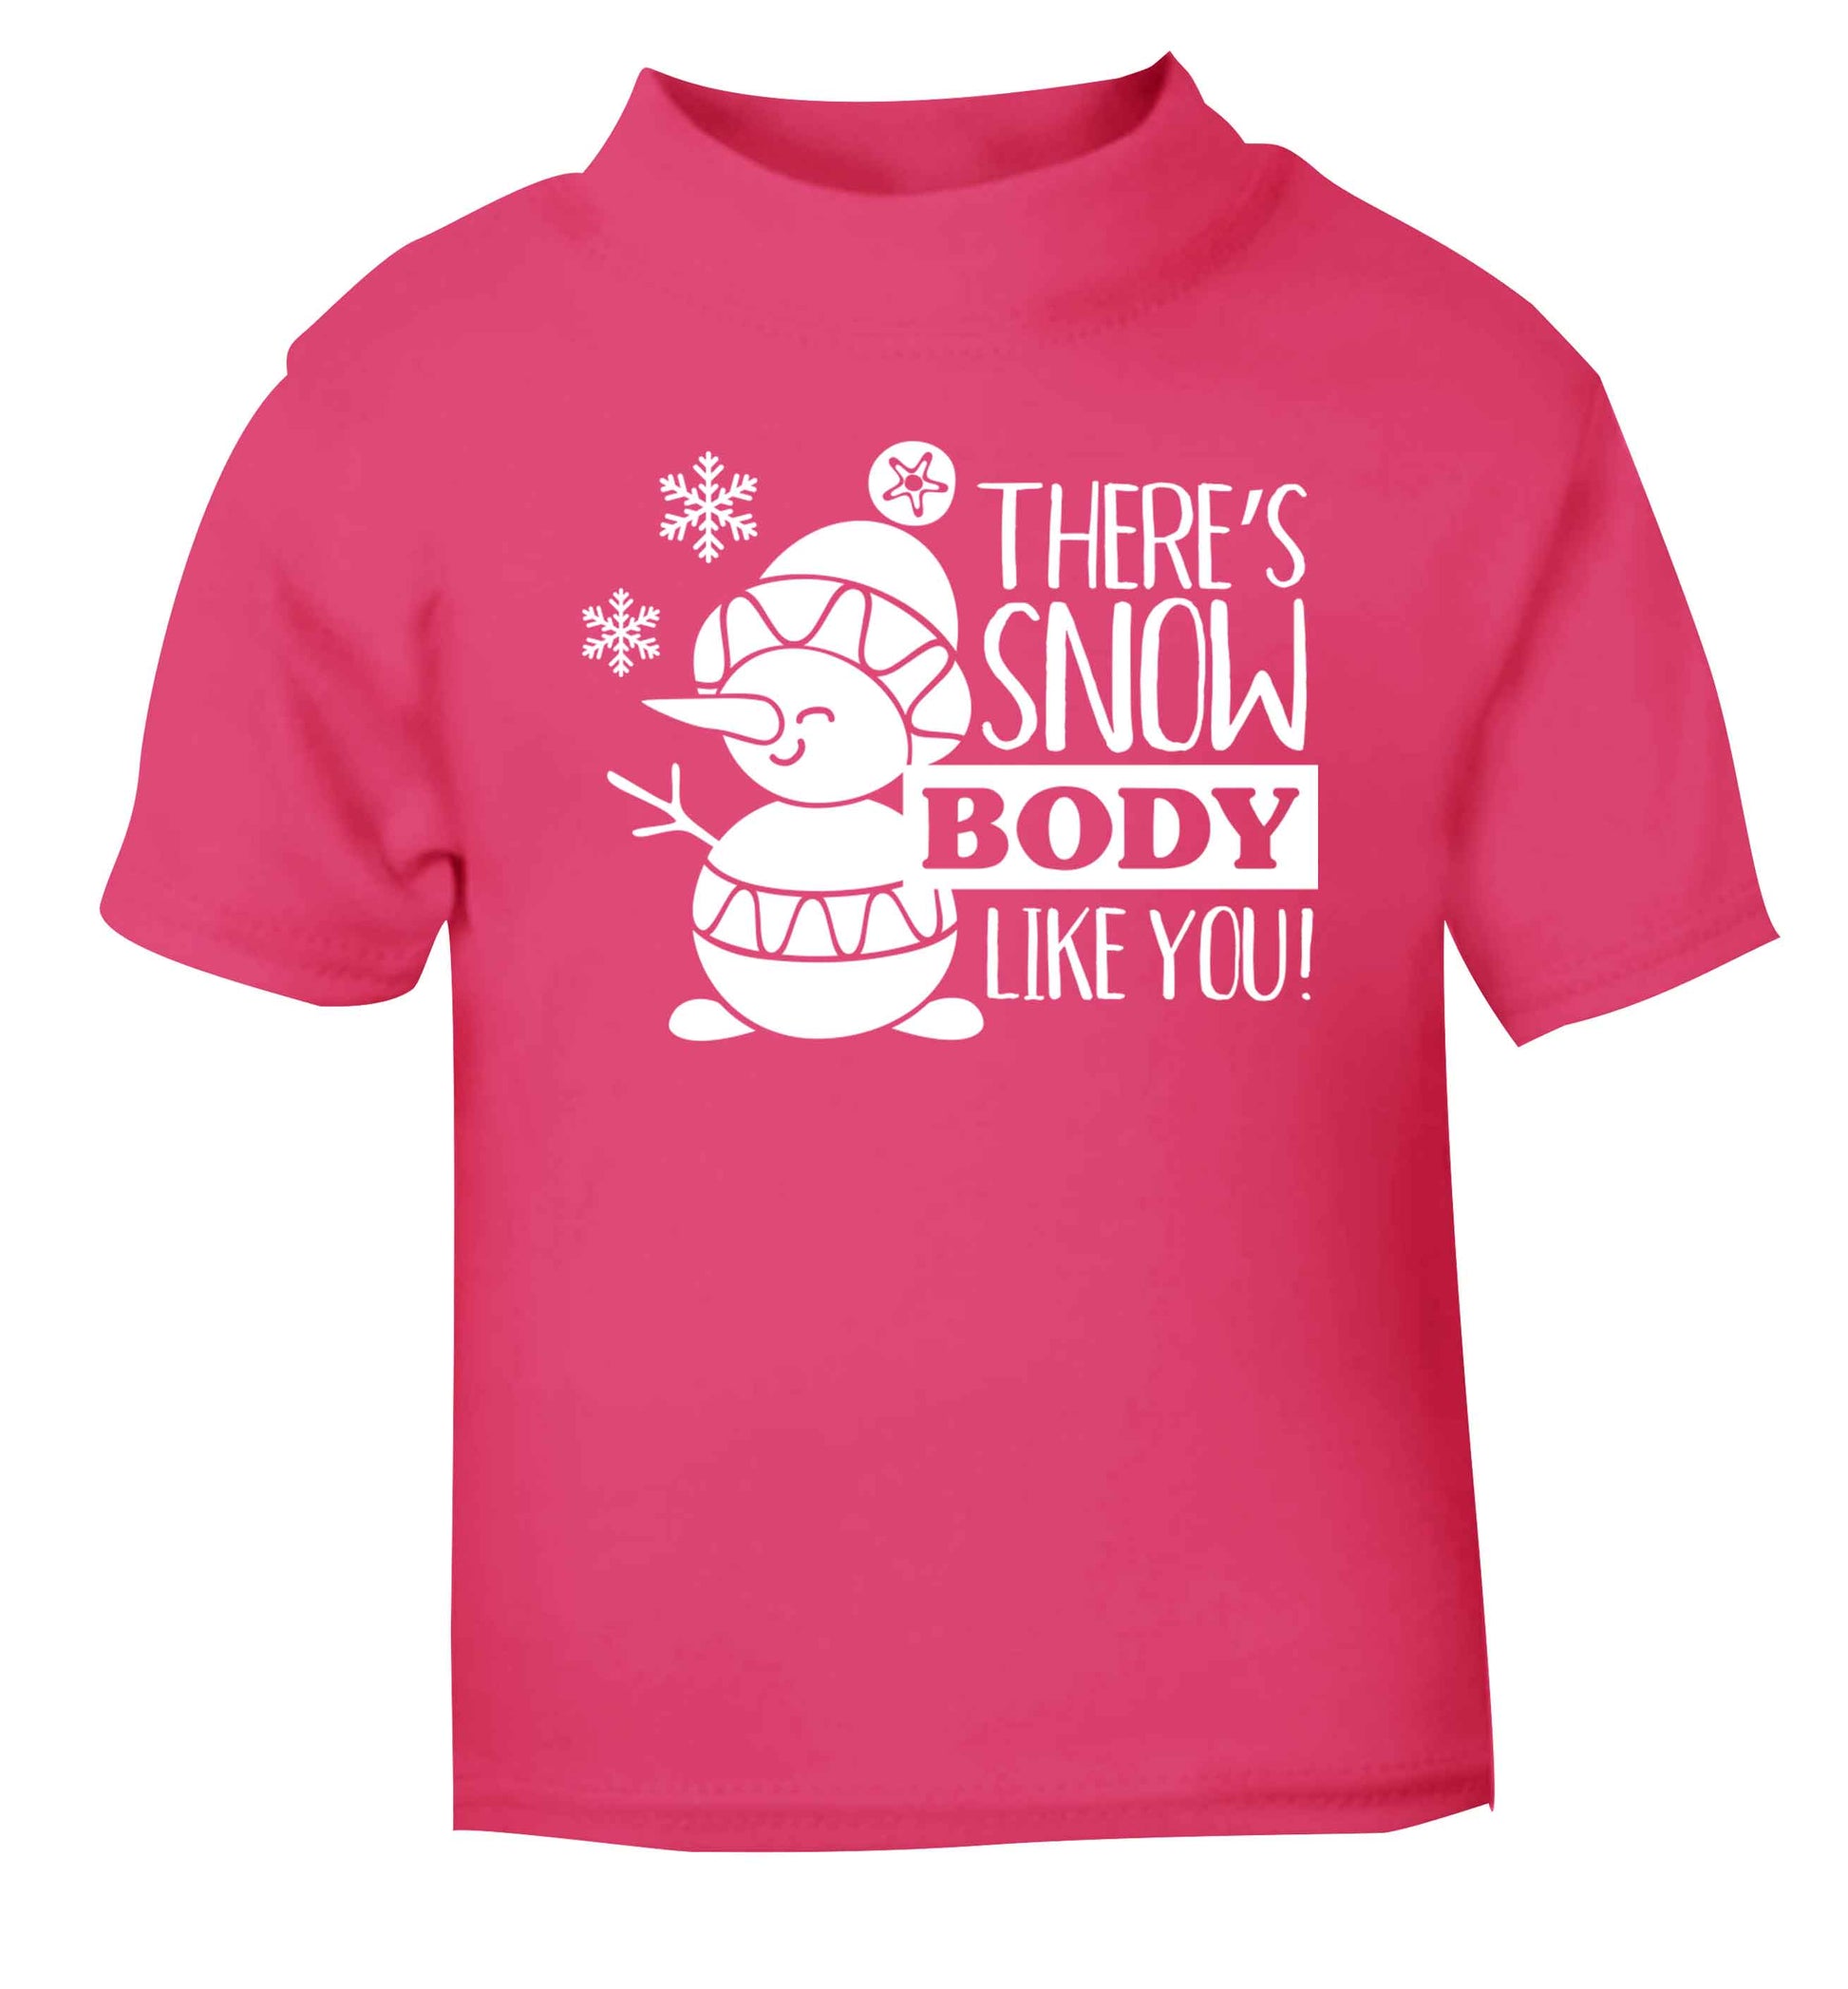 There's snow body like you pink baby toddler Tshirt 2 Years